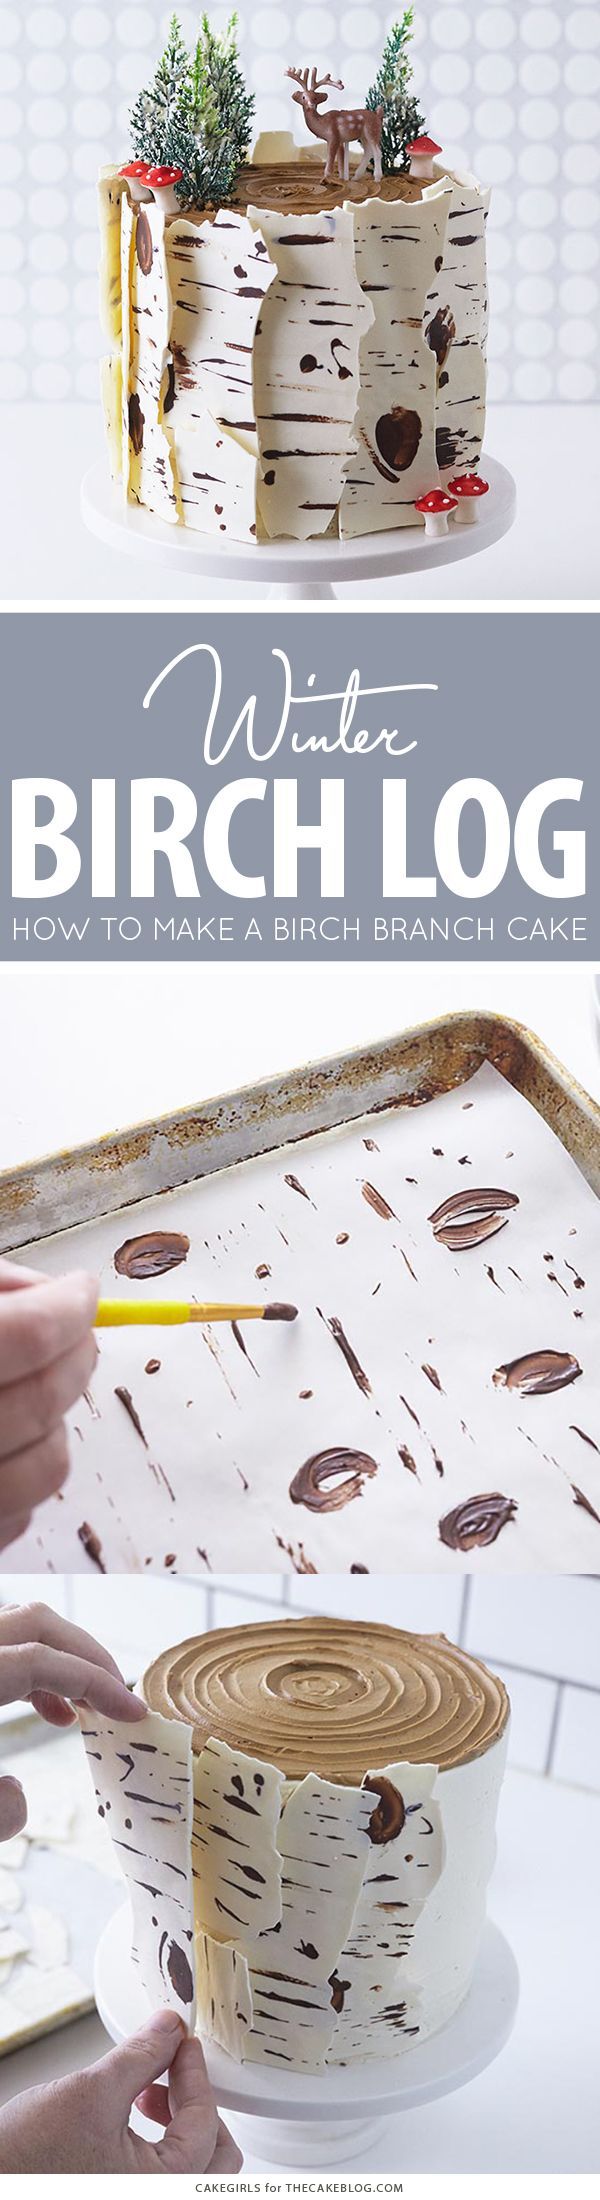 Birch Log Cake! Learn how to make this wintry, birch cake that looks just like a natural birch branch | by Cakegirls for